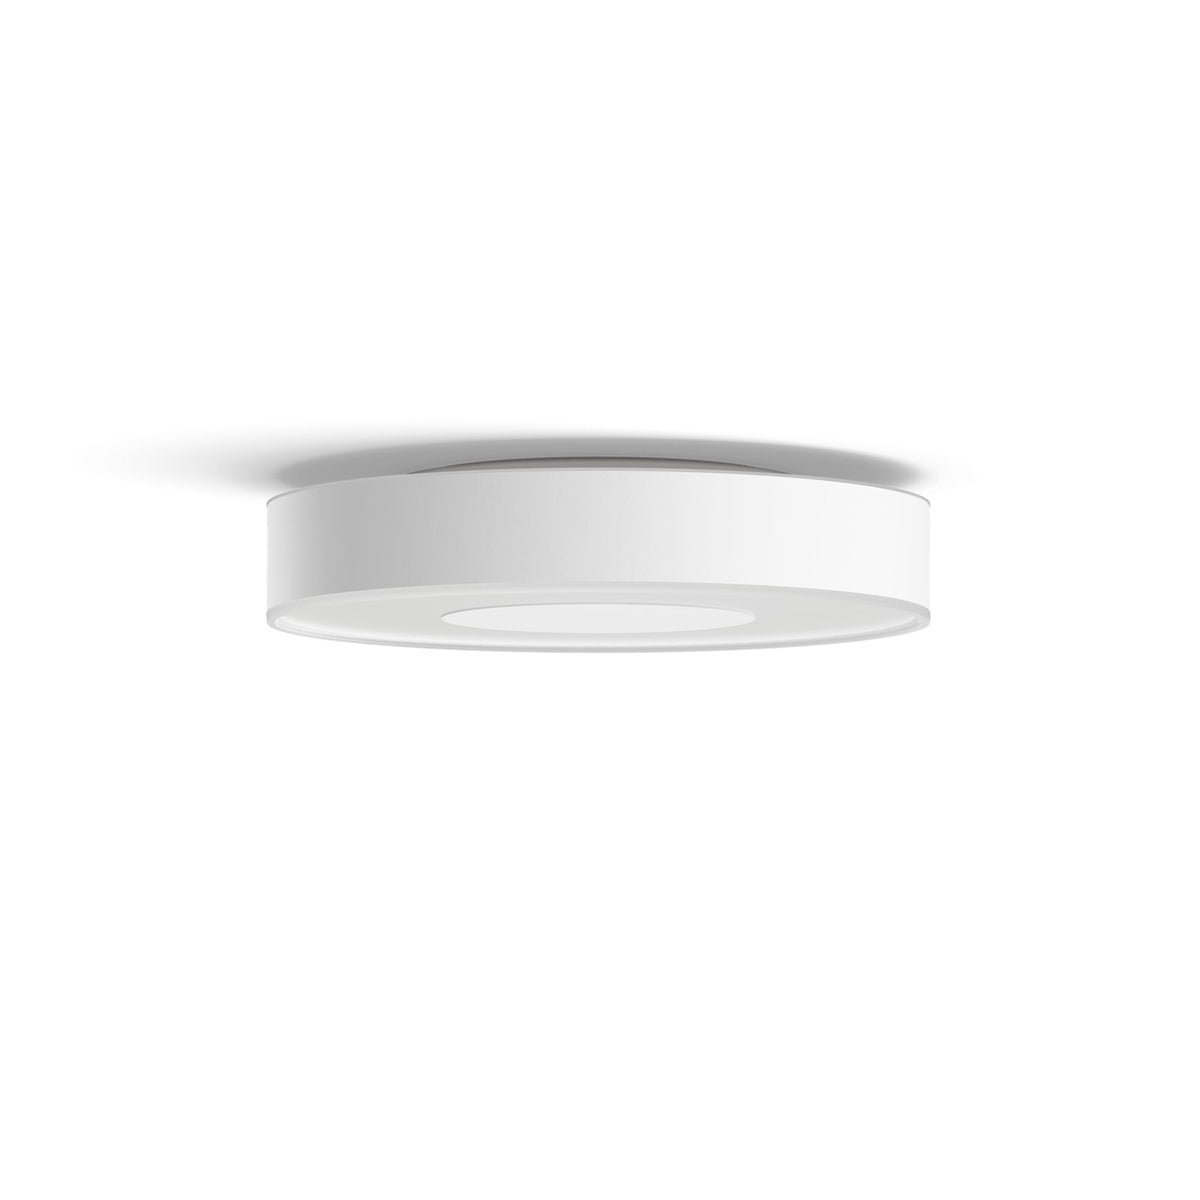 Philips Hue Xamento medium ceiling lamp in White - White and colour ambiance